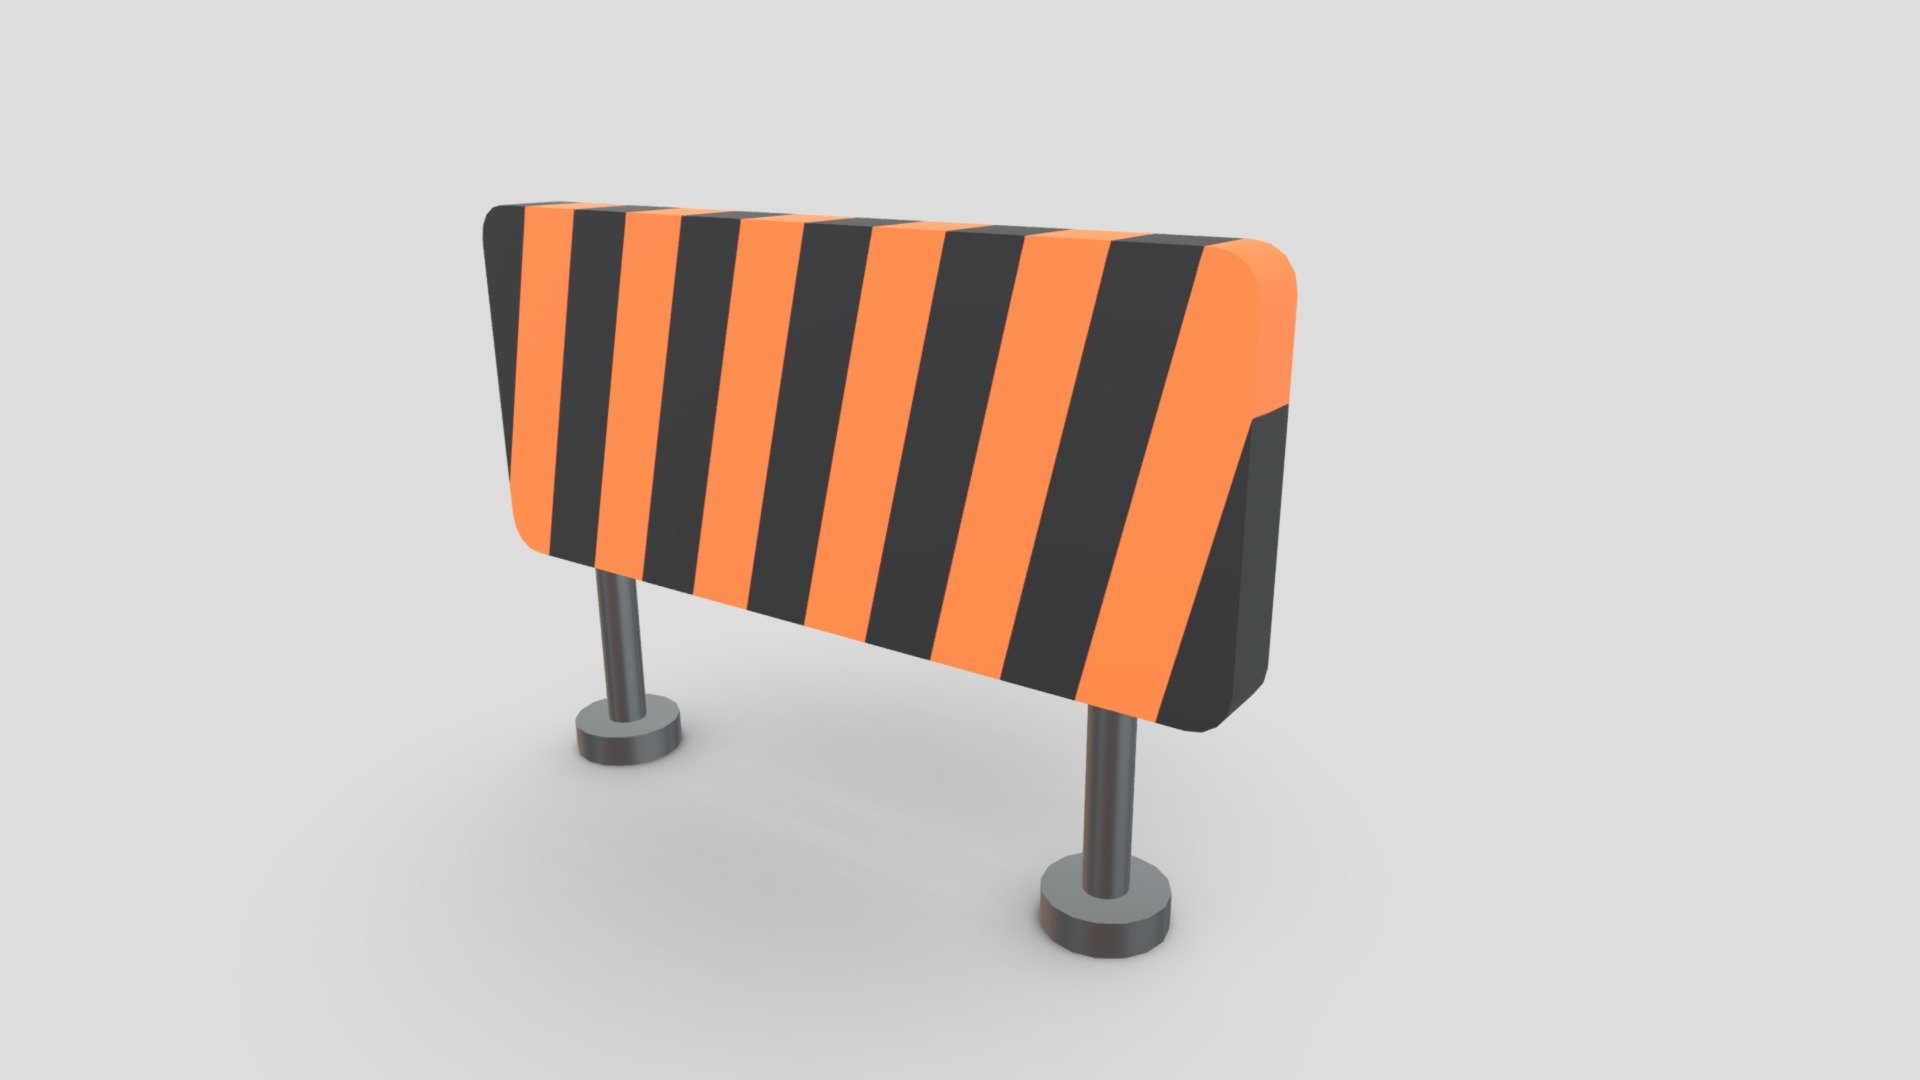 Hurdle Traffic Barrier that was created using Blender. This is a simple low poly traffic barrier that uses the standard caution sign when setup in construction areas. This object was made using the metalness workflow and PBR textures.

Features:


Object uses a simple low poly design
Object uses the metalness workflow and 2K PBR textures in PNG format
Texture colours, and roughness/gloss can be edited
Object has been manually UV unwrapped to match its PBR textures
Blend file includes pre-applied textures and camera setups
Blend file includes lighting provided by the HDRI map downloaded from HDRI Haven
Object has been exported in 4 file formats (FBX, OBJ, GLTF/GLB, DAE/Collada)
Files have been archived in an easy to follow hierarchy

Included Textures:


AO, Diffuse, Roughness, Gloss
UVLayout

The source file that is uploaded is for demonstration use and is uploaded in FBX format. In the additional file you will find all model exports and the textures that go along with them 3d model